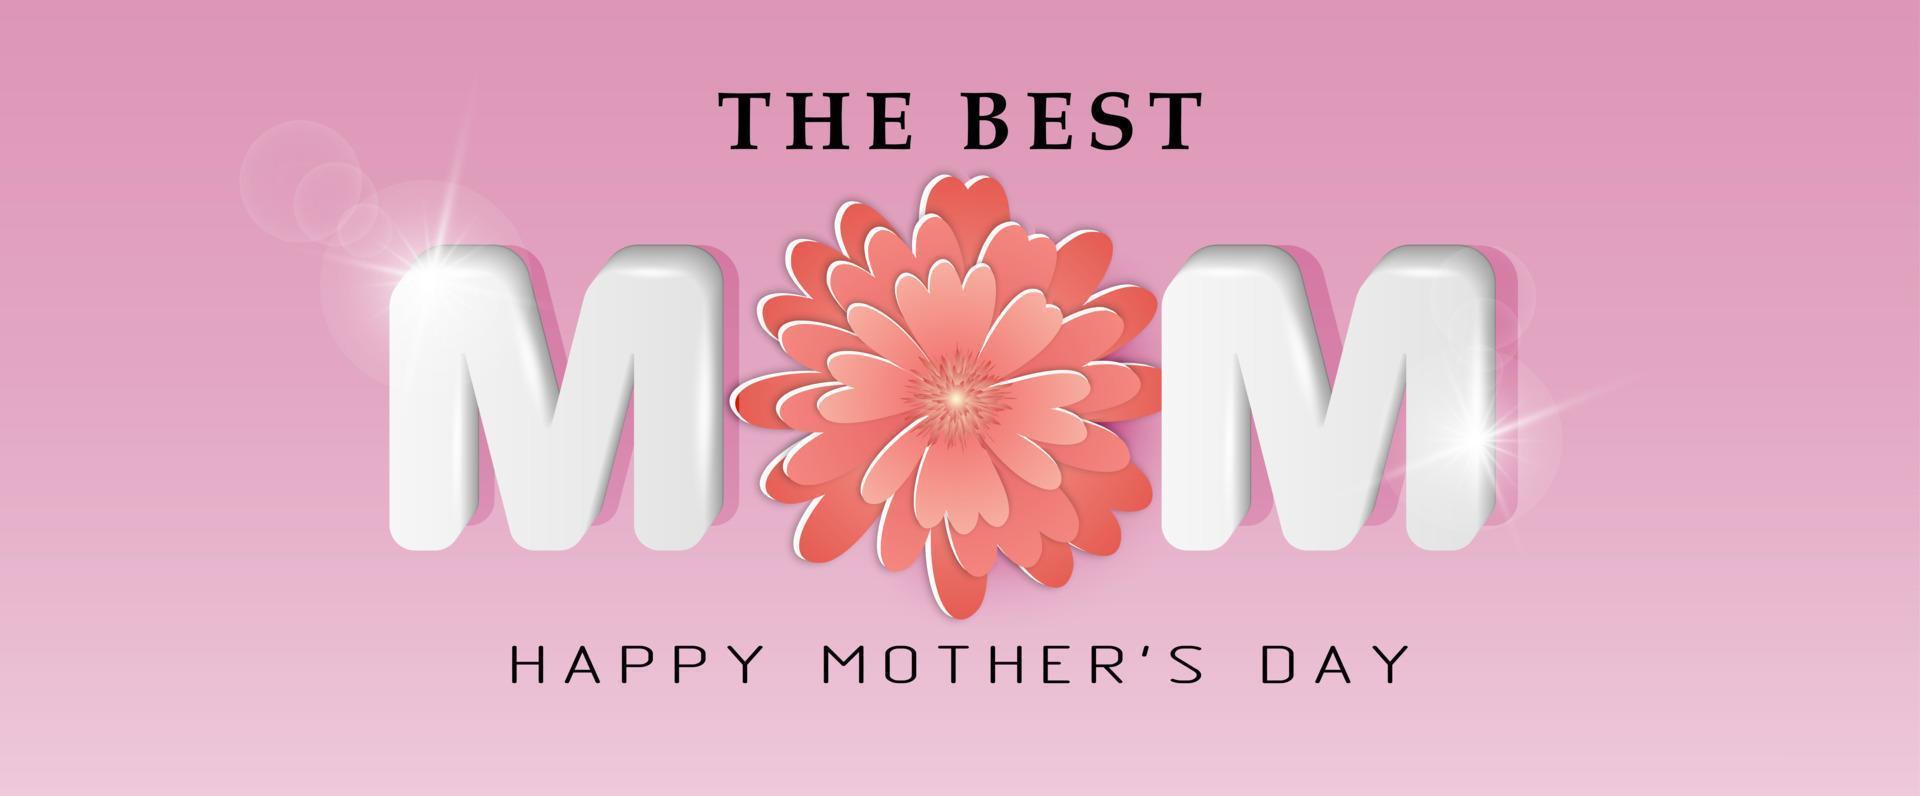 Mother's day greeting card. The best mom.  3d paper flowers on a pink background. Modern vector illustration